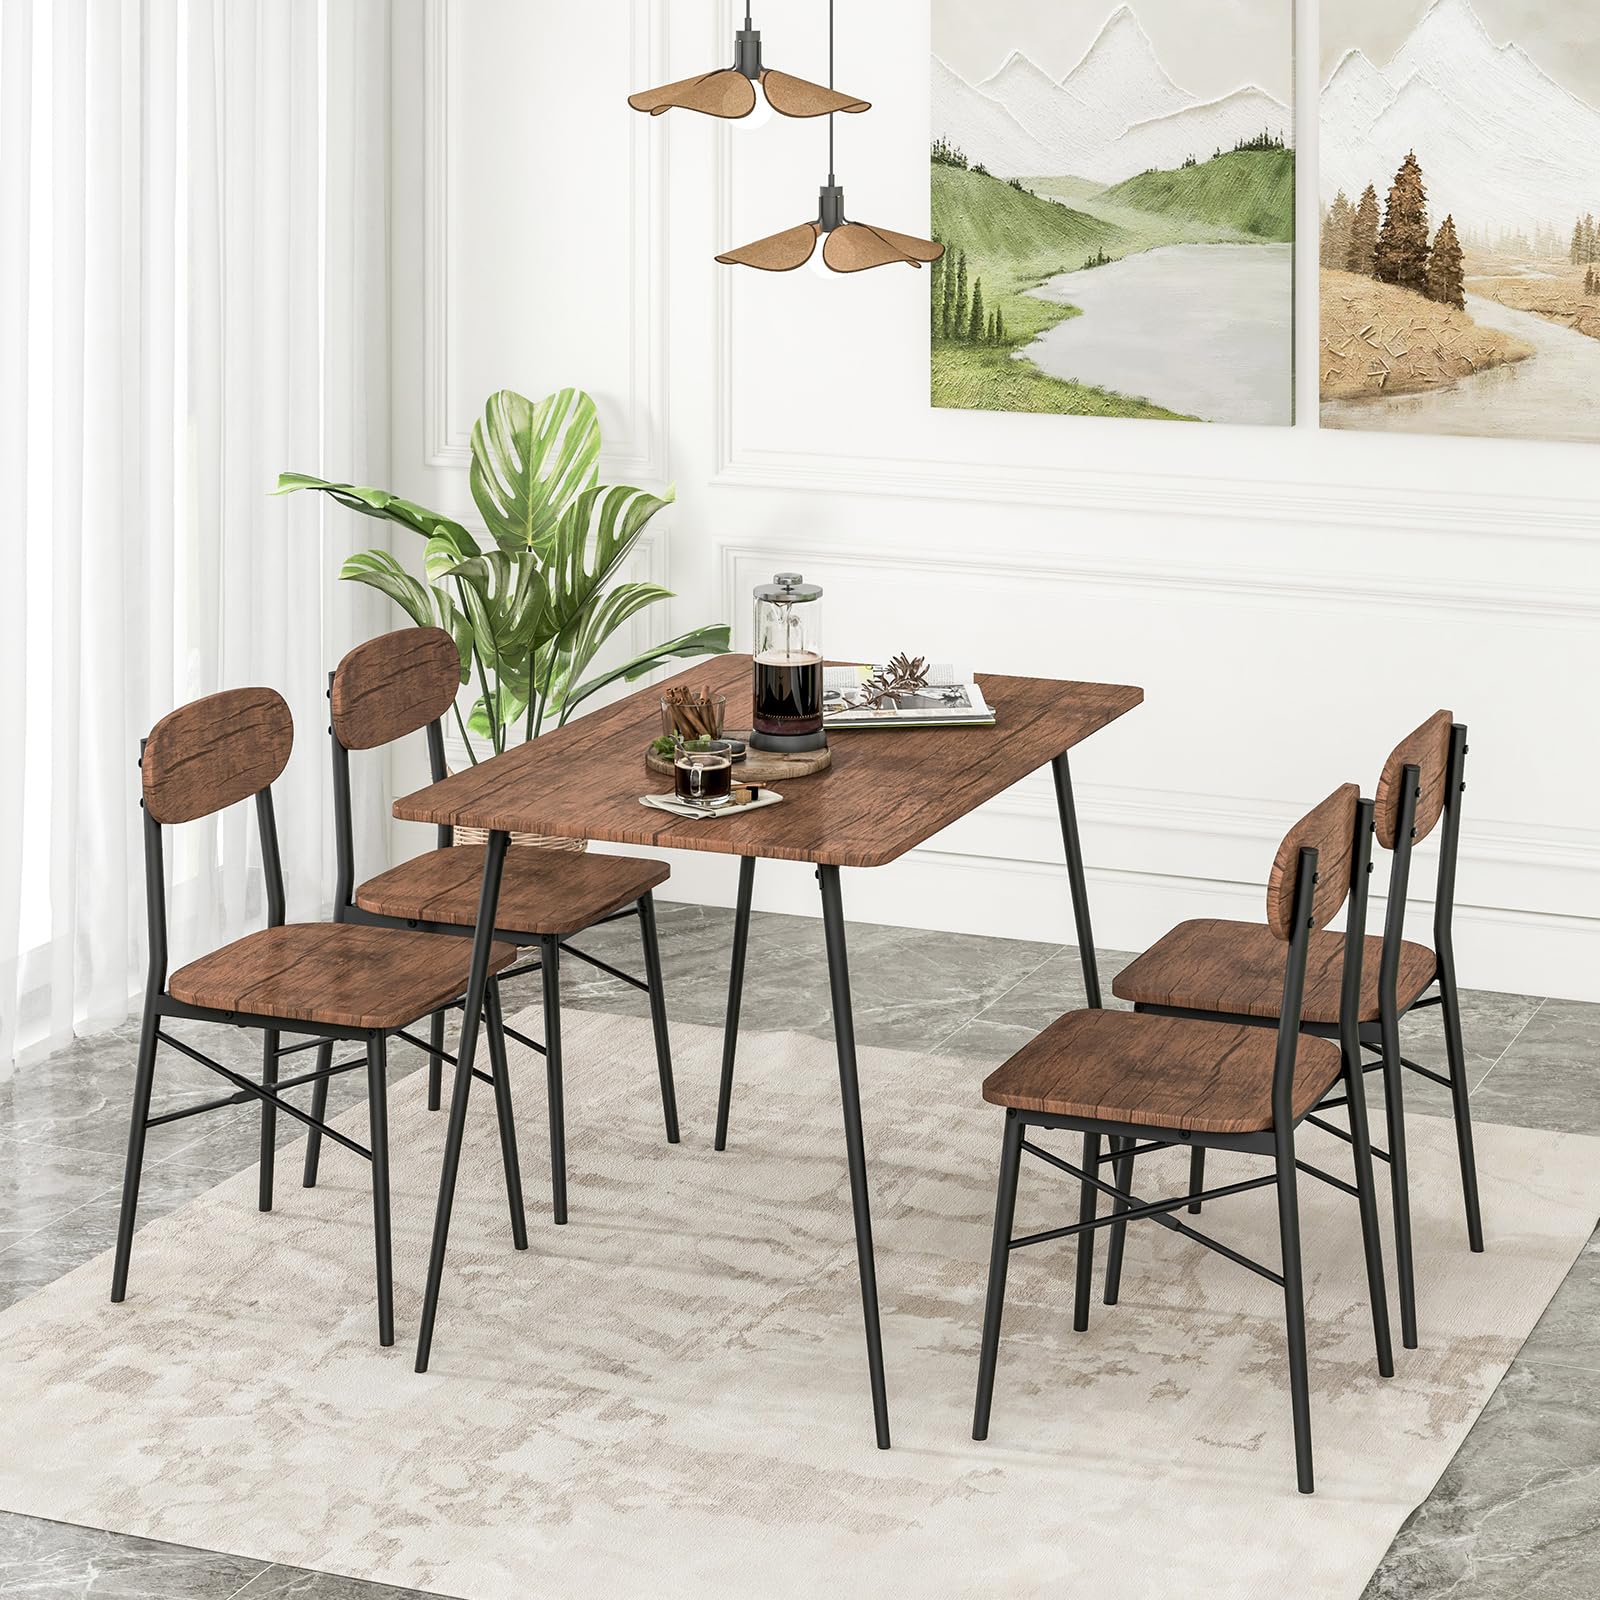 Giantex Dining Table Set for 4, Mid-Century Kitchen Furniture Set w/Kitchen Table, 4 Dining Chairs